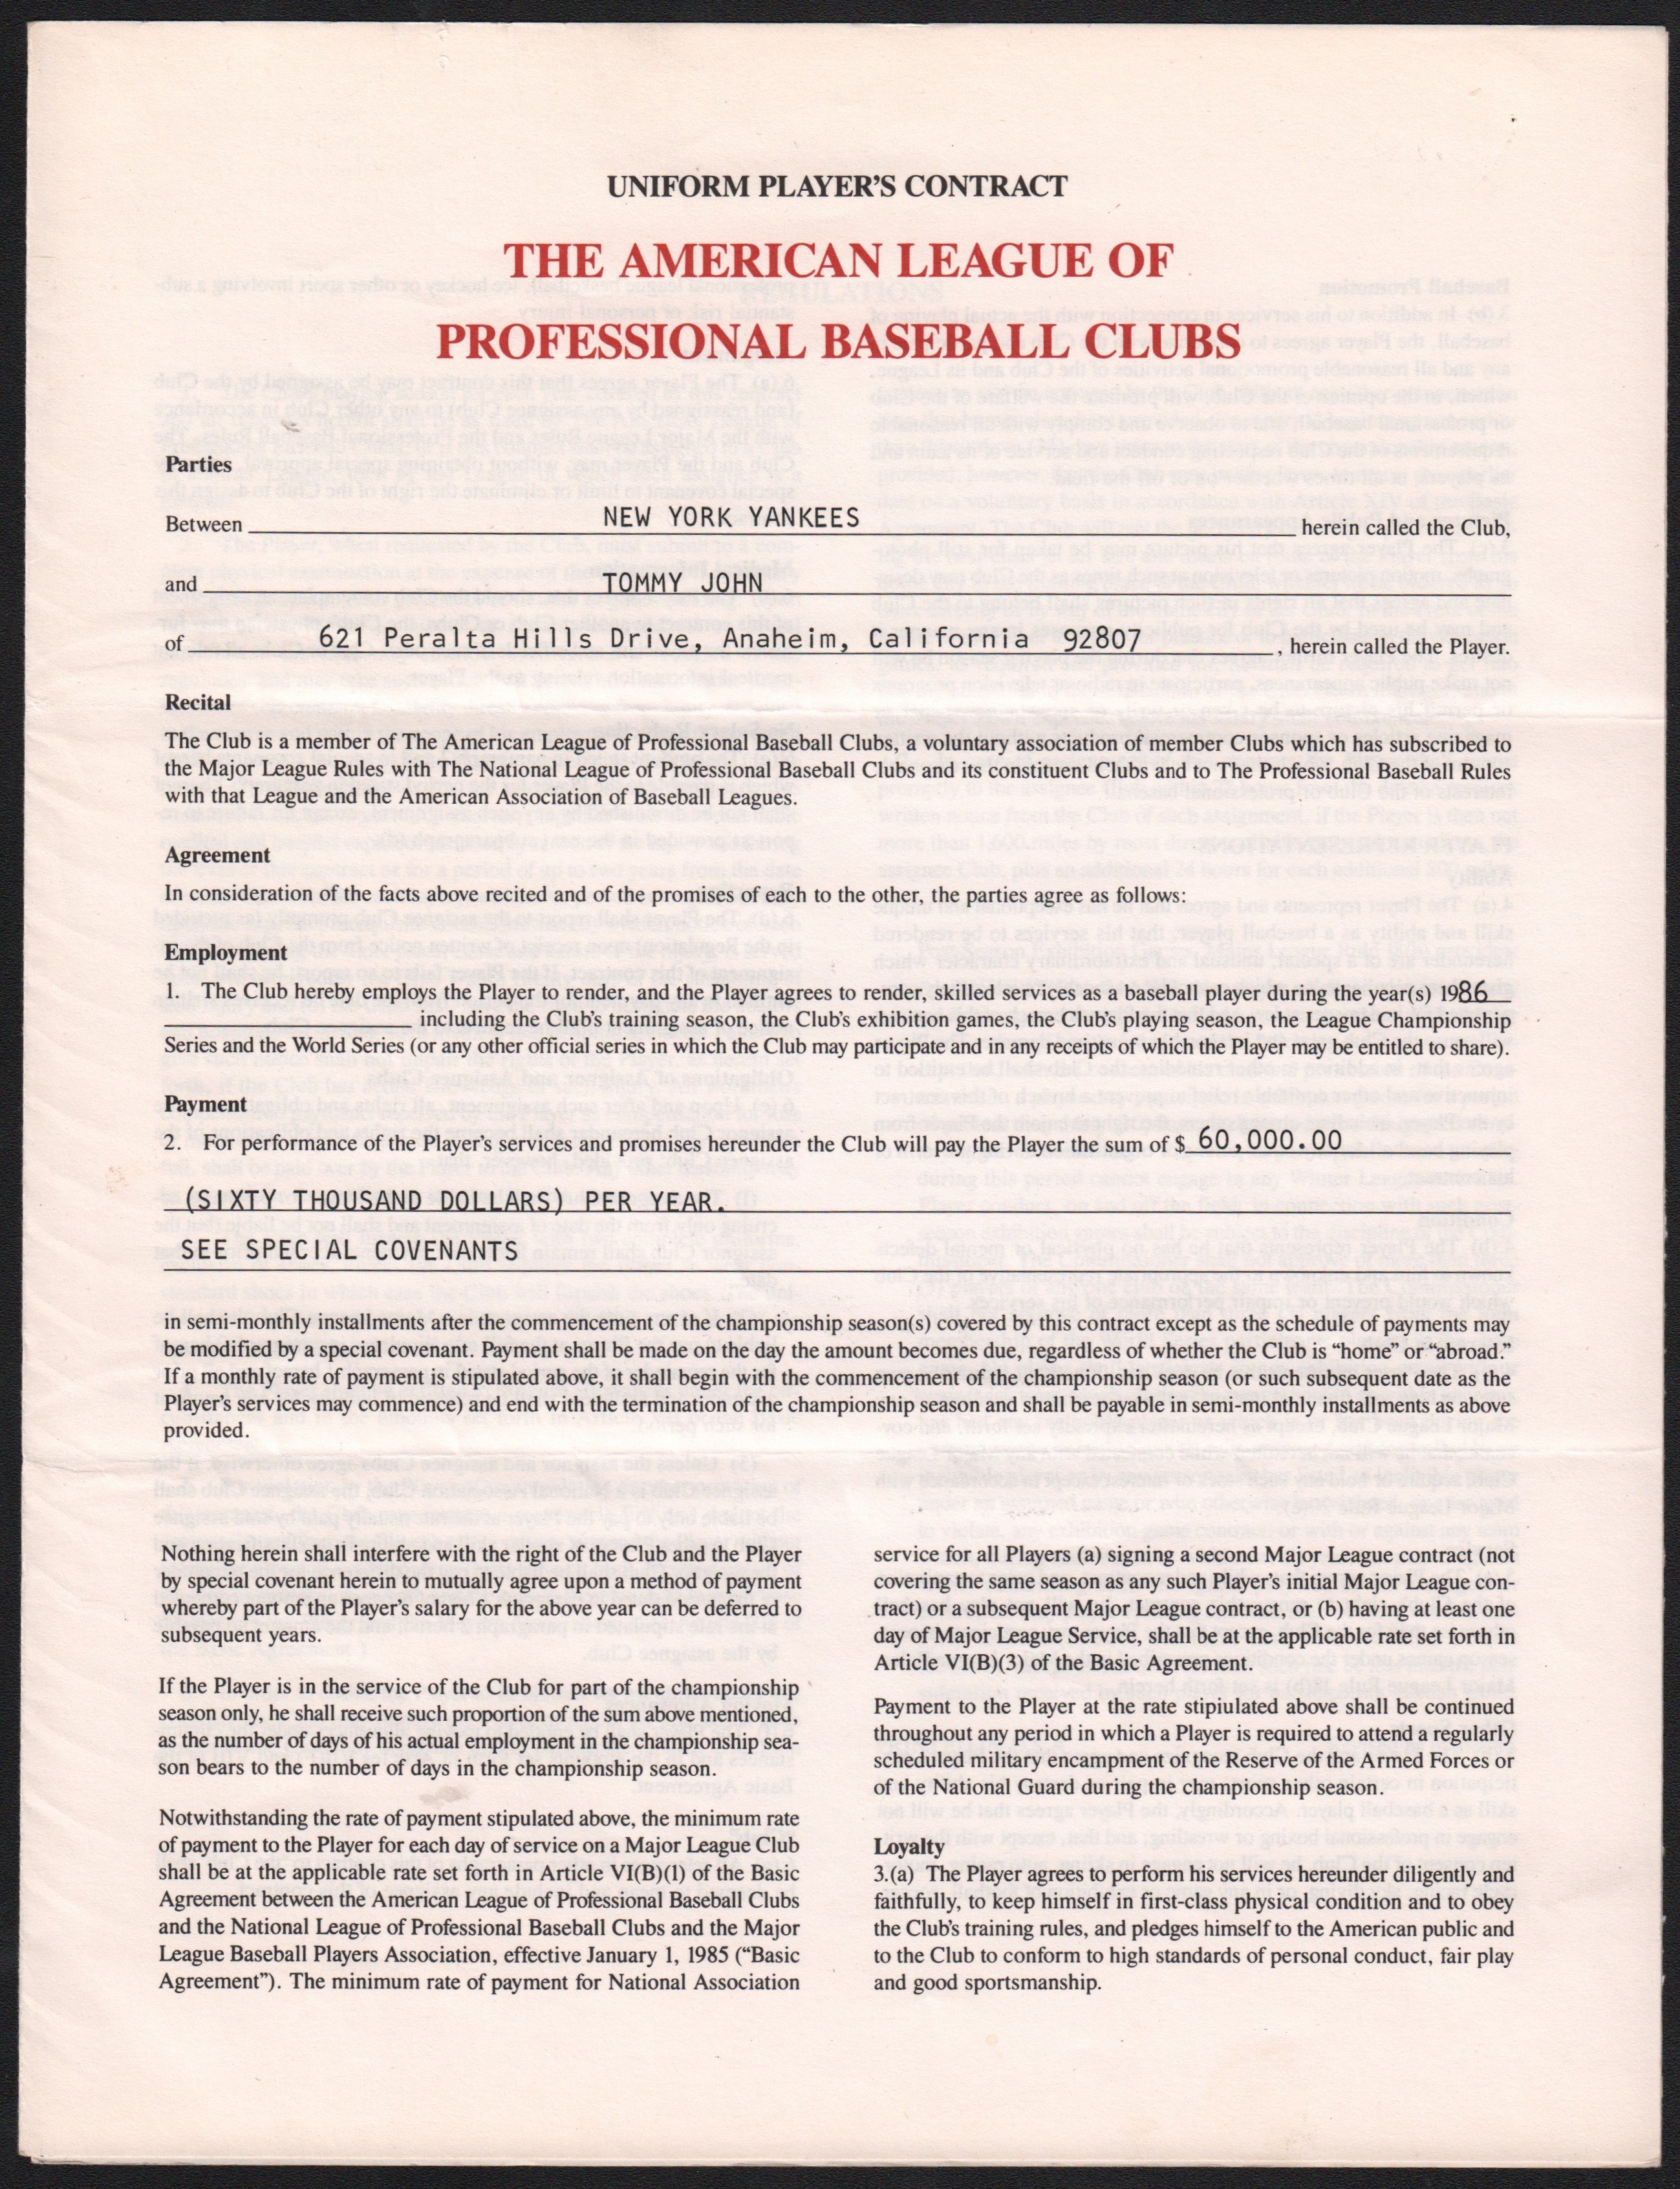 - 1986 Tommy John New York Yankees Contract with "Tommy John" Surgery Sign-off